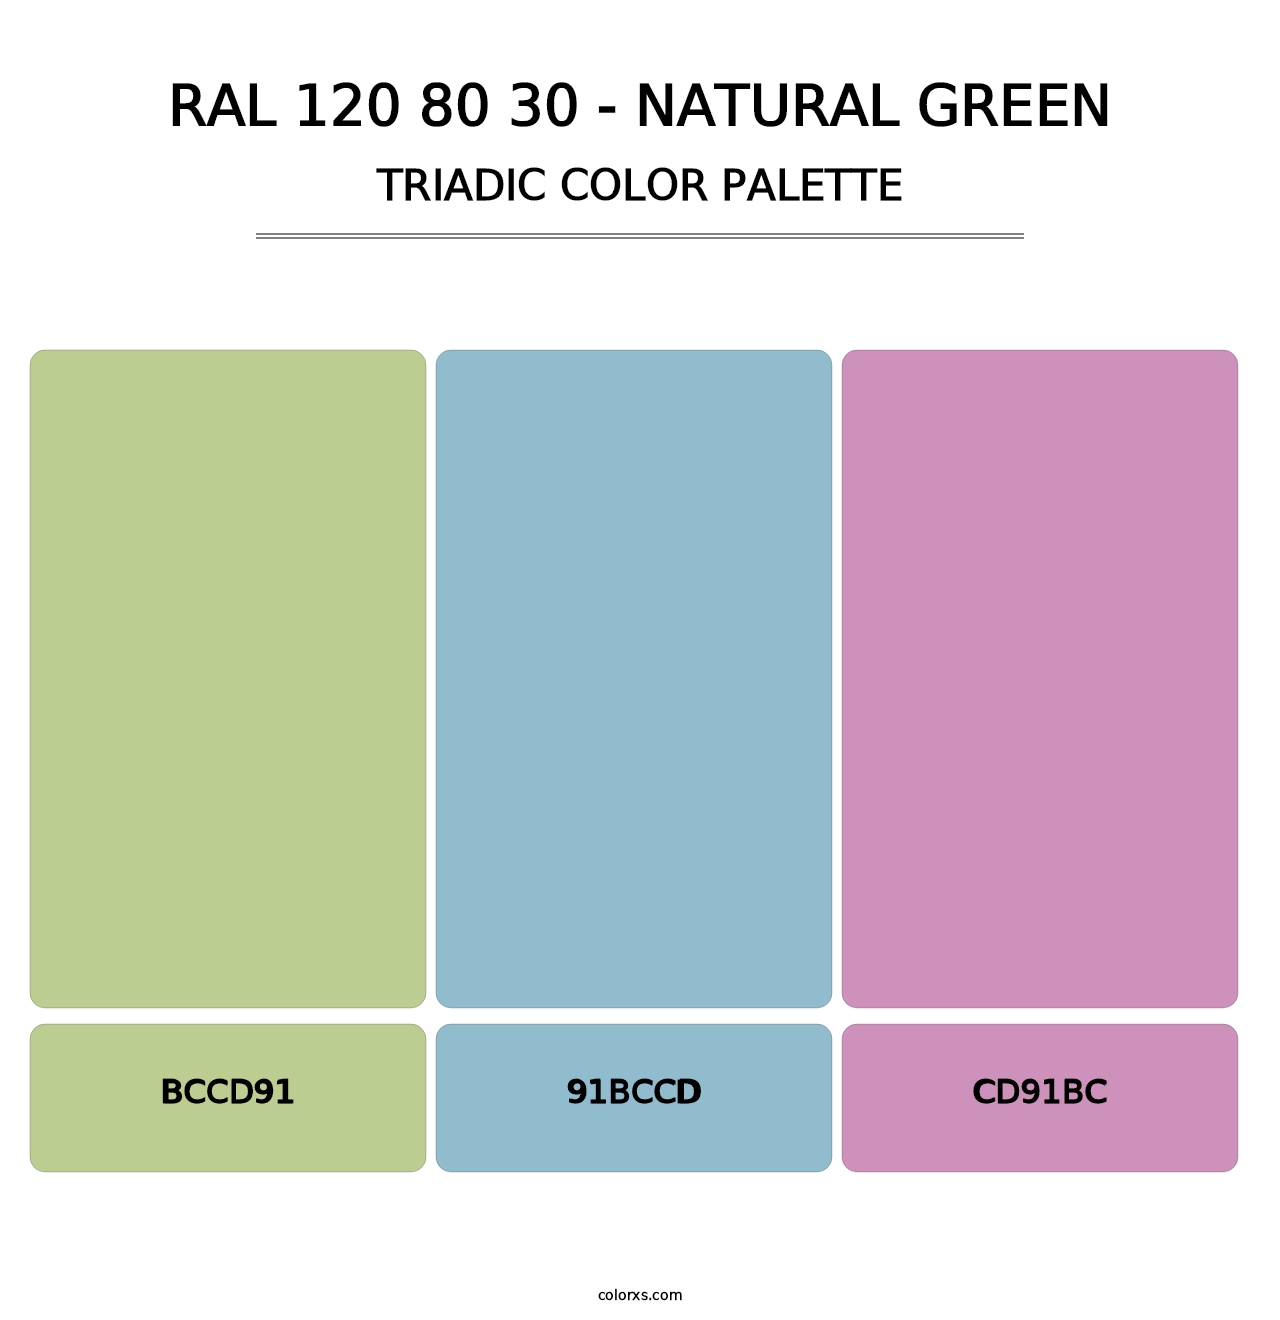 RAL 120 80 30 - Natural Green - Triadic Color Palette